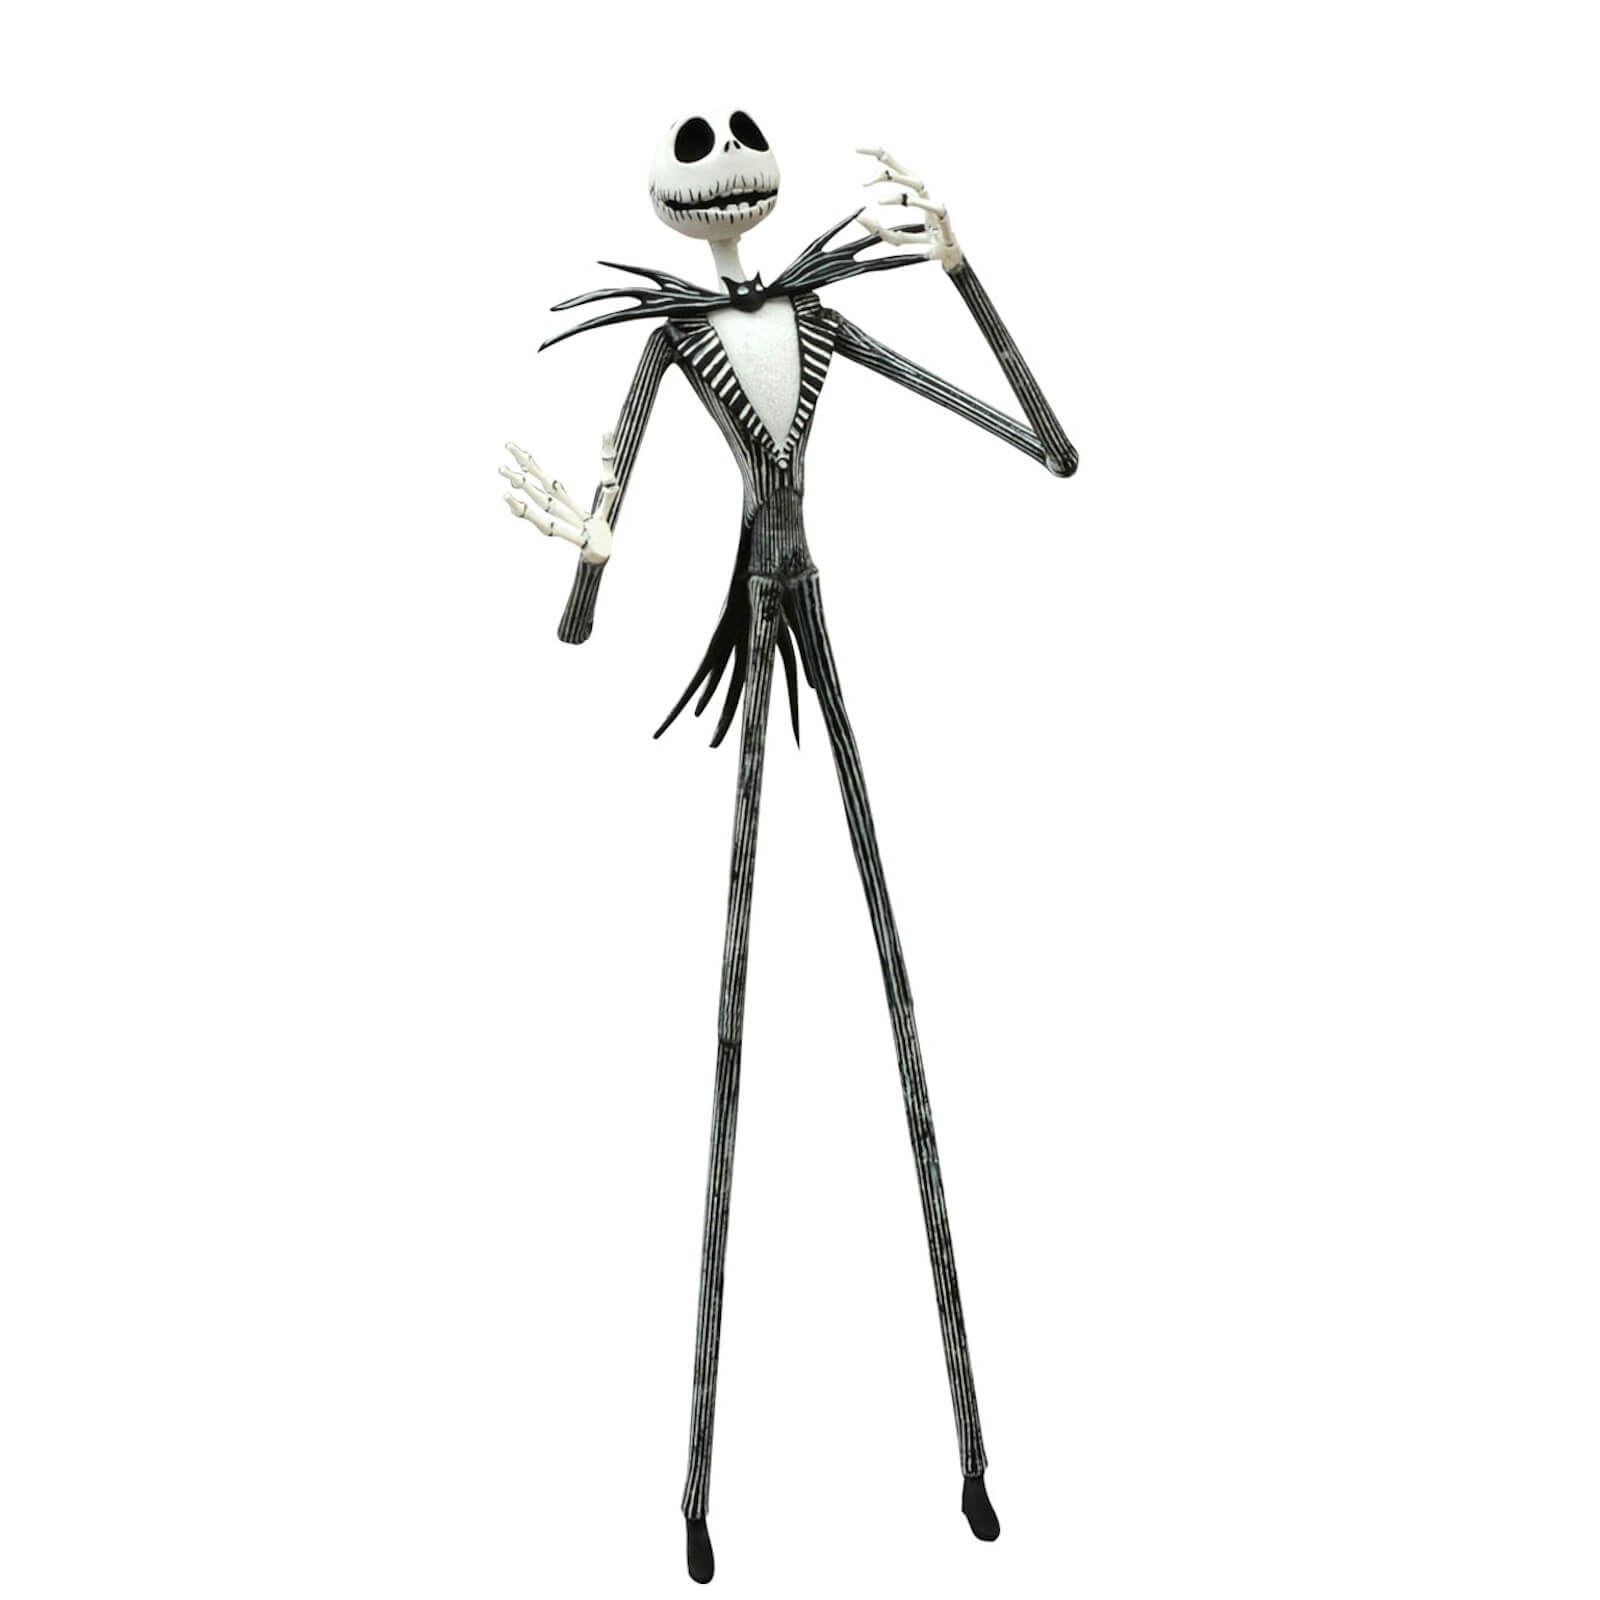 Diamond Select The Nightmare Before Christmas Best Of Deluxe Action Figure - Jack Skellington